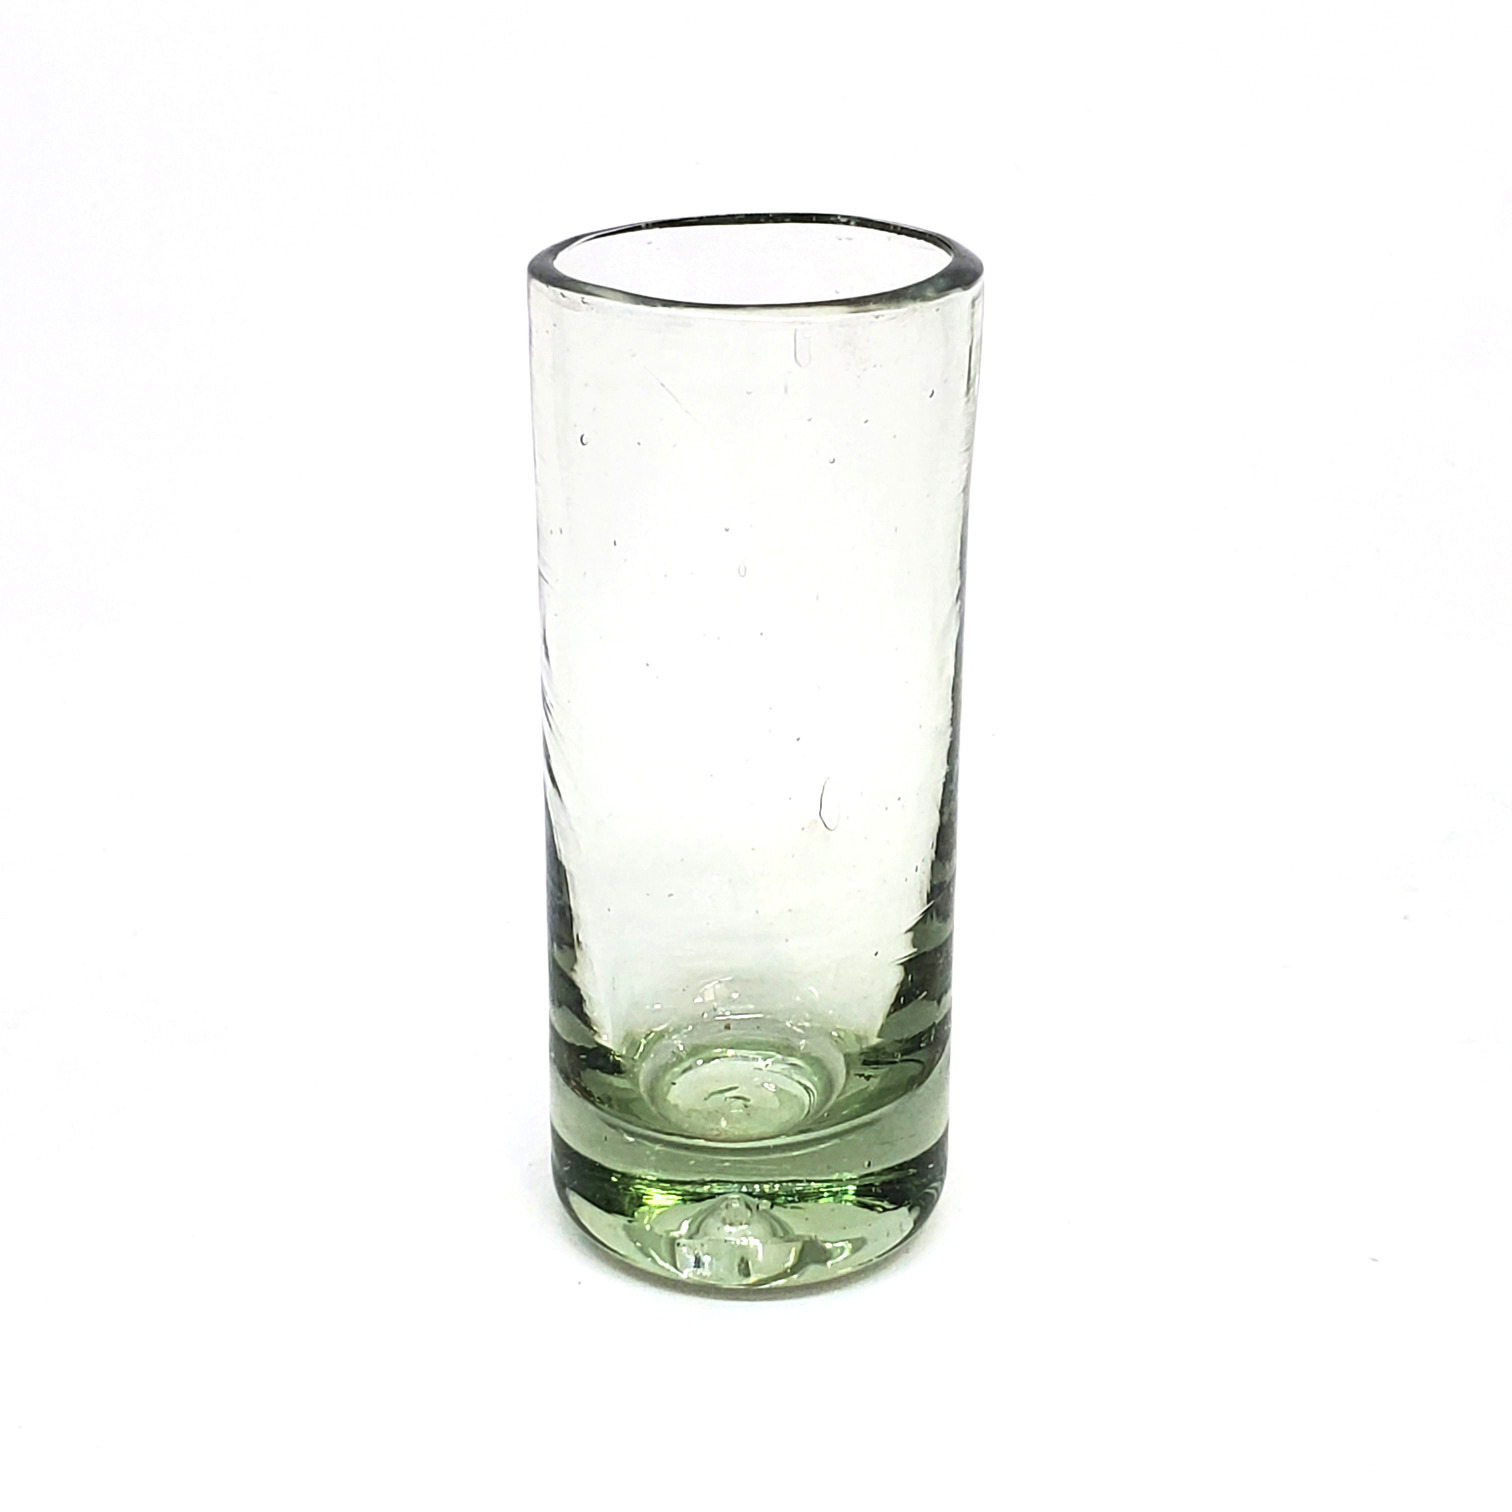 MEXICAN GLASSWARE / Clear 2 oz Tequila Shot Glasses (set of 6) / Sip your favourite tequila or mezcal with these iconic clear handcrafted shot glasses.